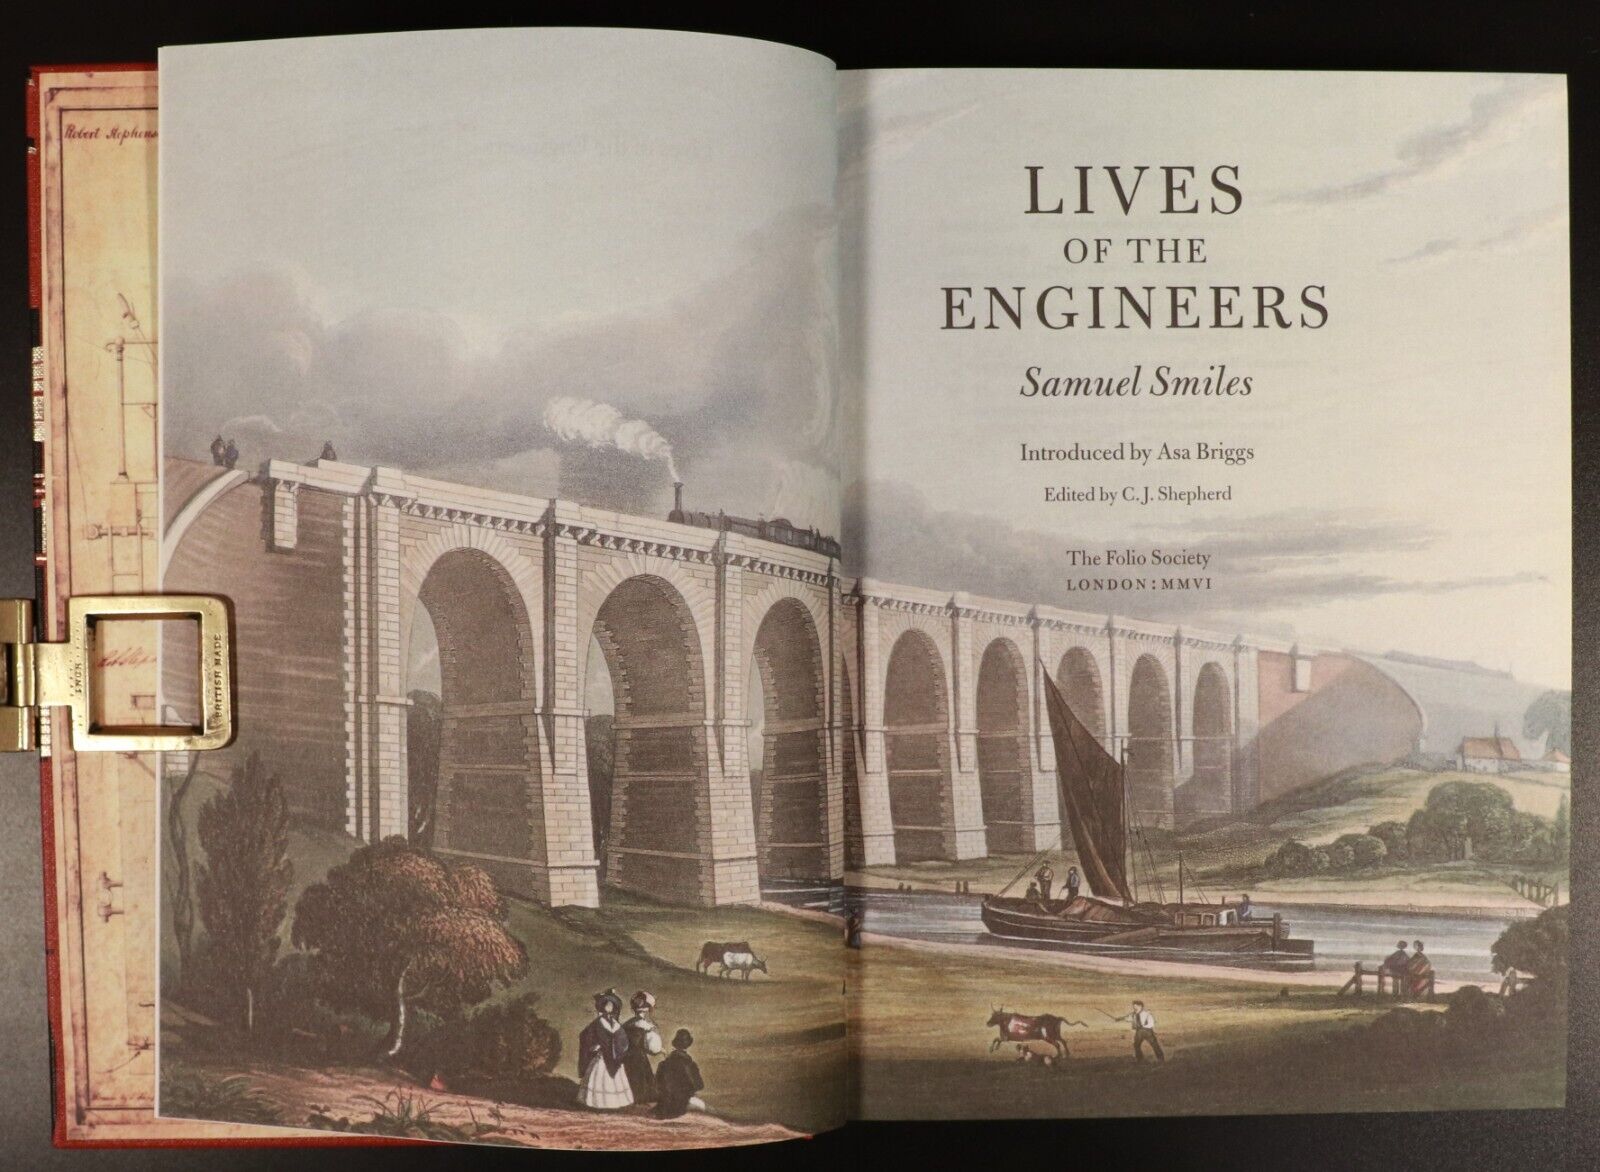 Lives Of The Engineers - 2007 - Folio Society - Engineering History Book